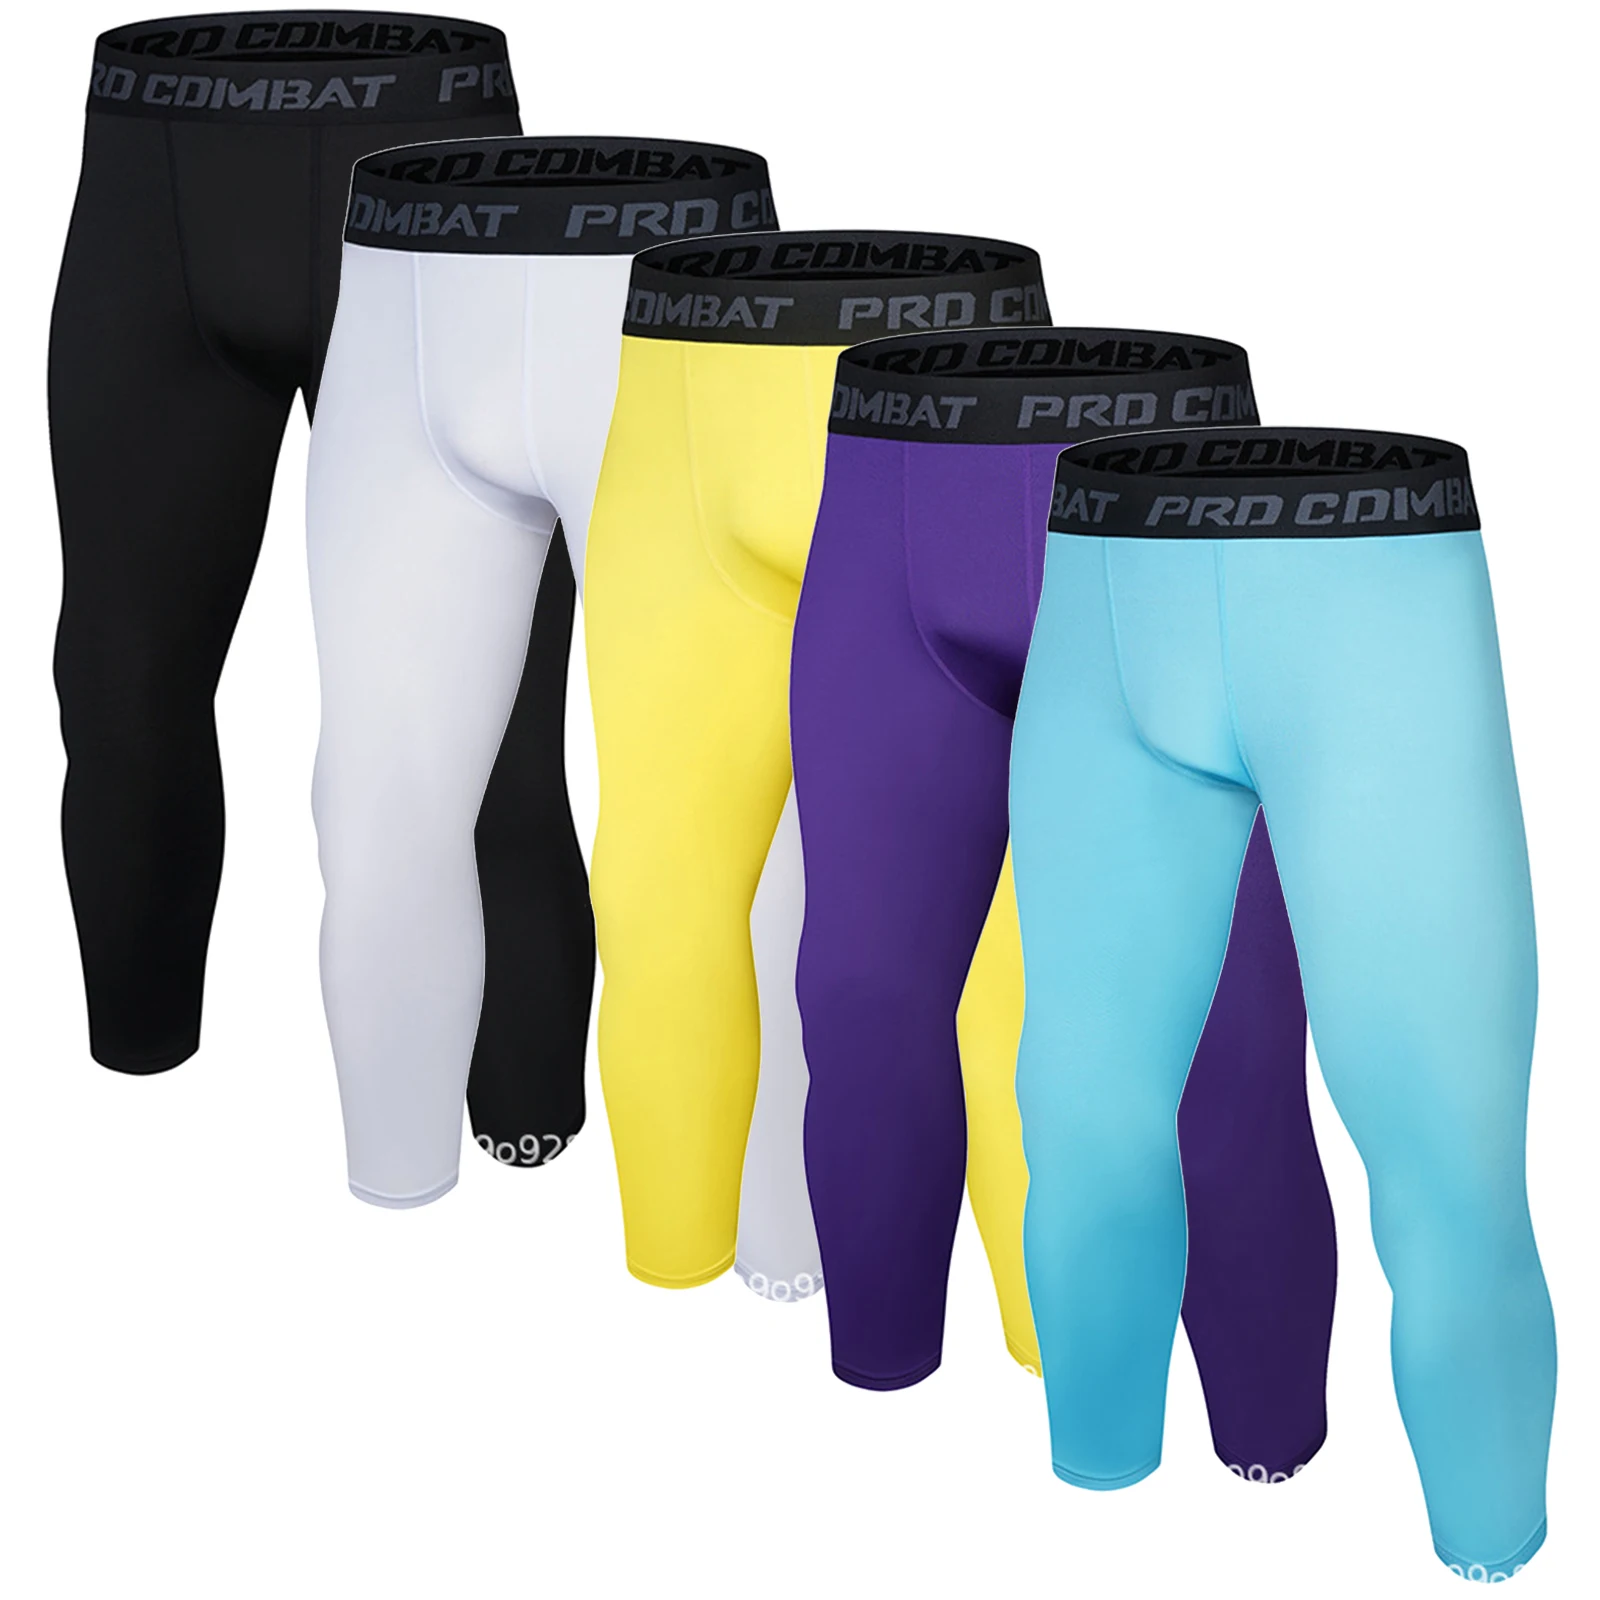 JUST RIDER 3/4 Leggings for Men Quick Dry Compression Sports